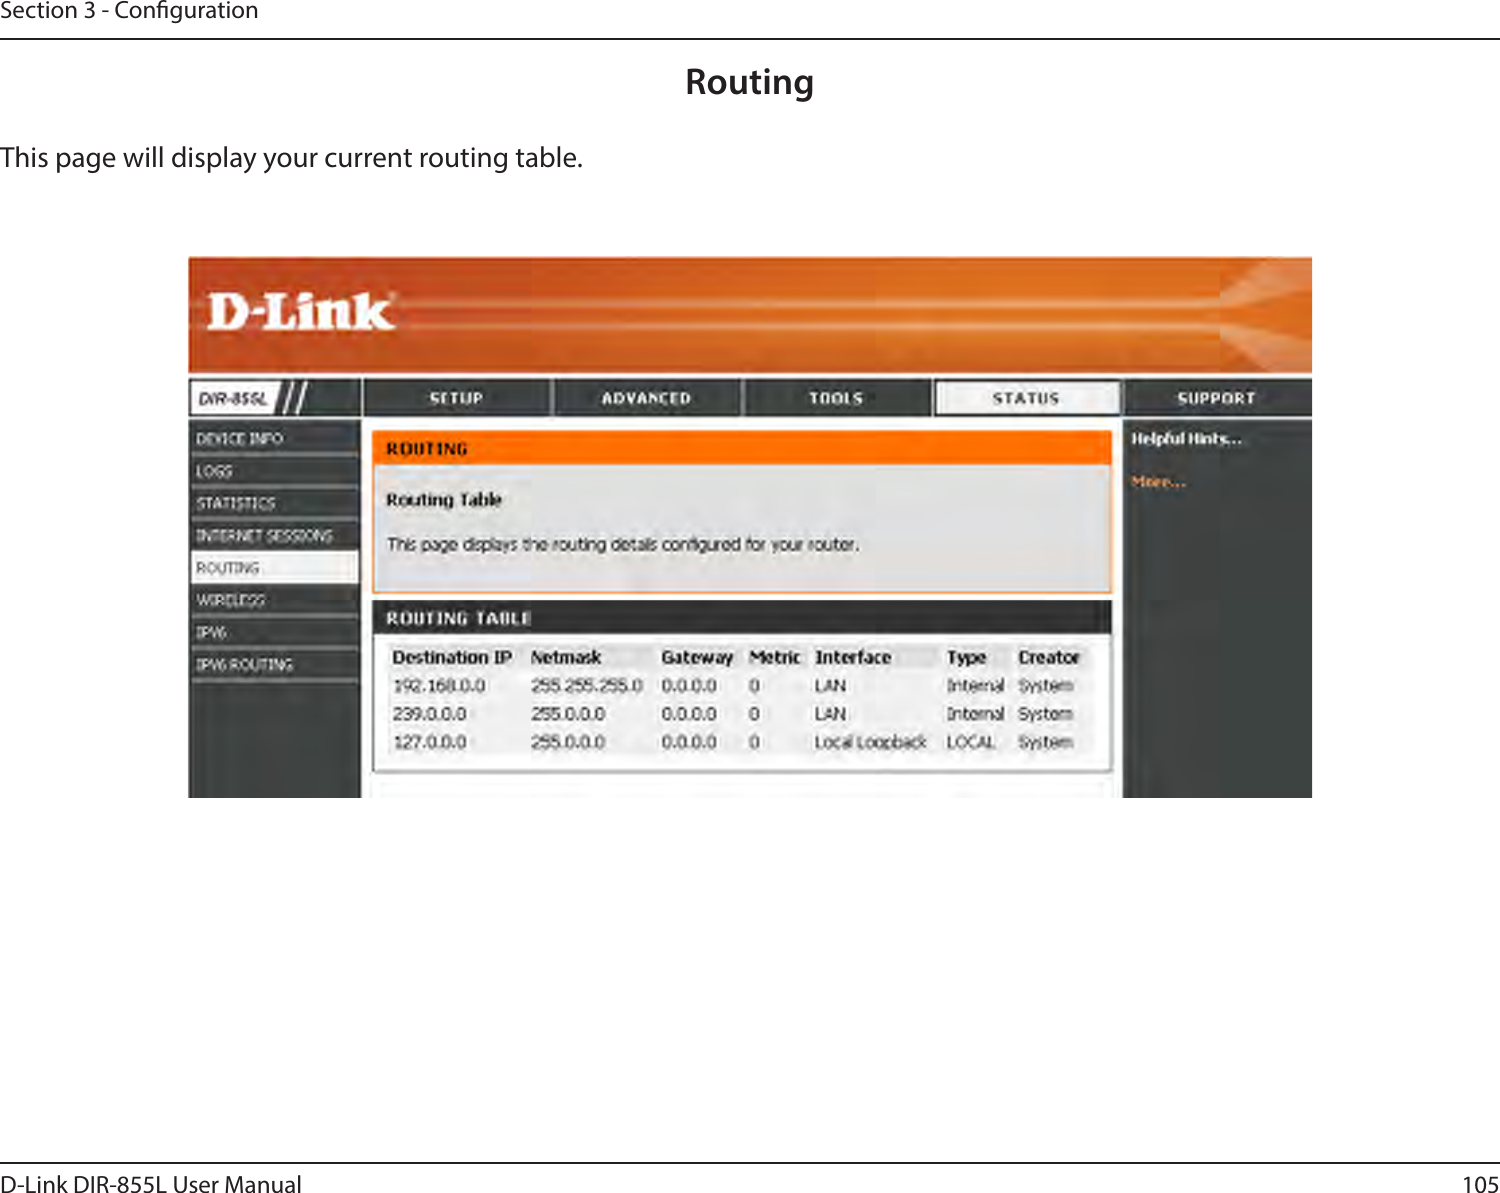 105D-Link DIR-855L User ManualSection 3 - CongurationRoutingThis page will display your current routing table.